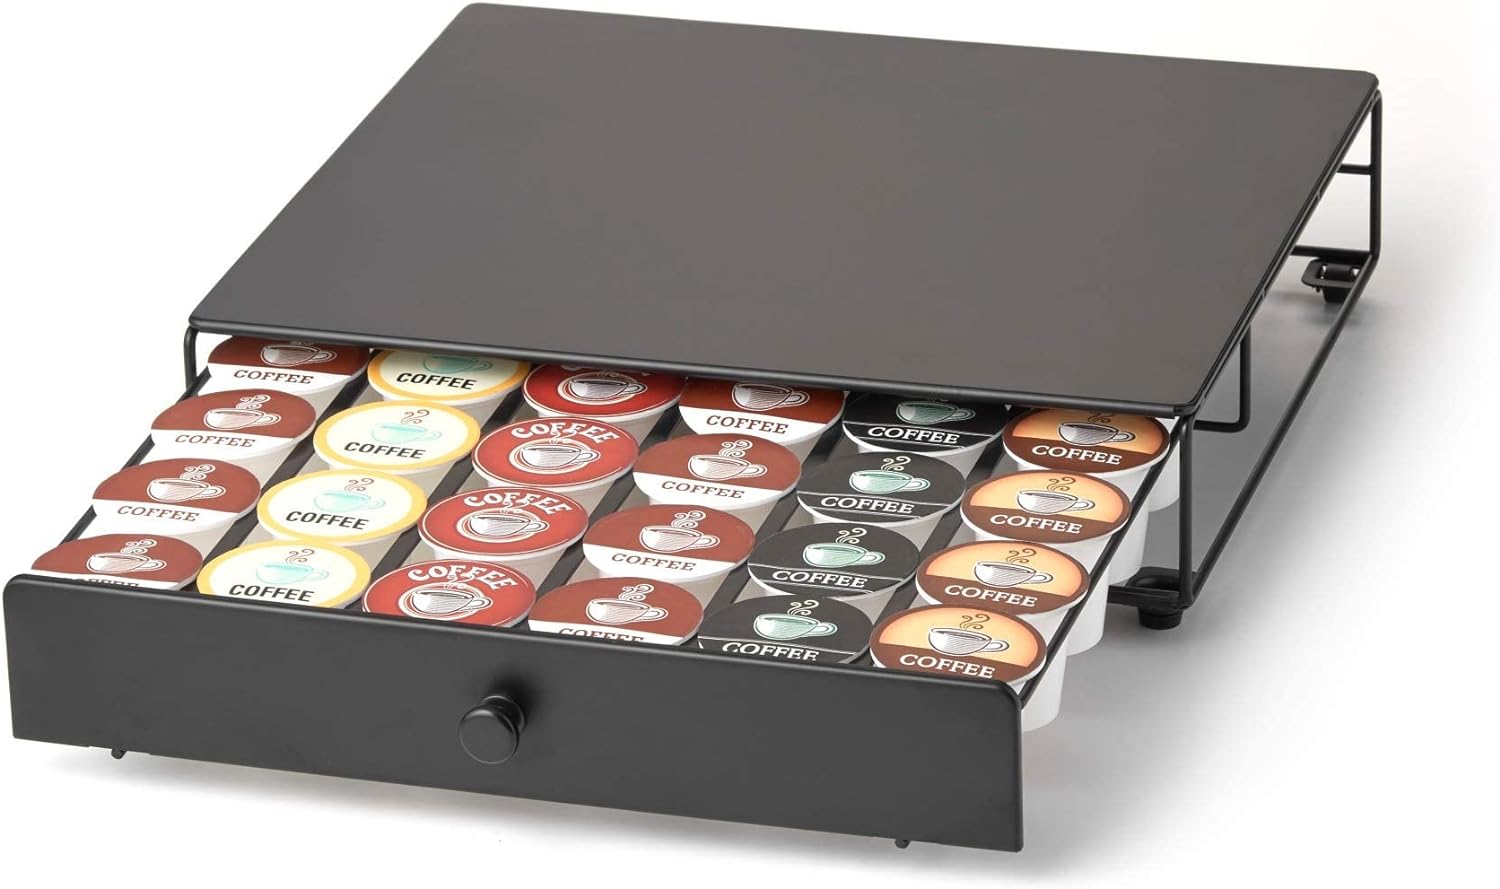 Nifty Rolling Coffee Pod Drawer – Black Finish, Compatible with K-Cups, 36 Pod Pack Holder, Compact Under Coffee Pot Storage Drawer, Slim Home Kitchen Counter Organizer